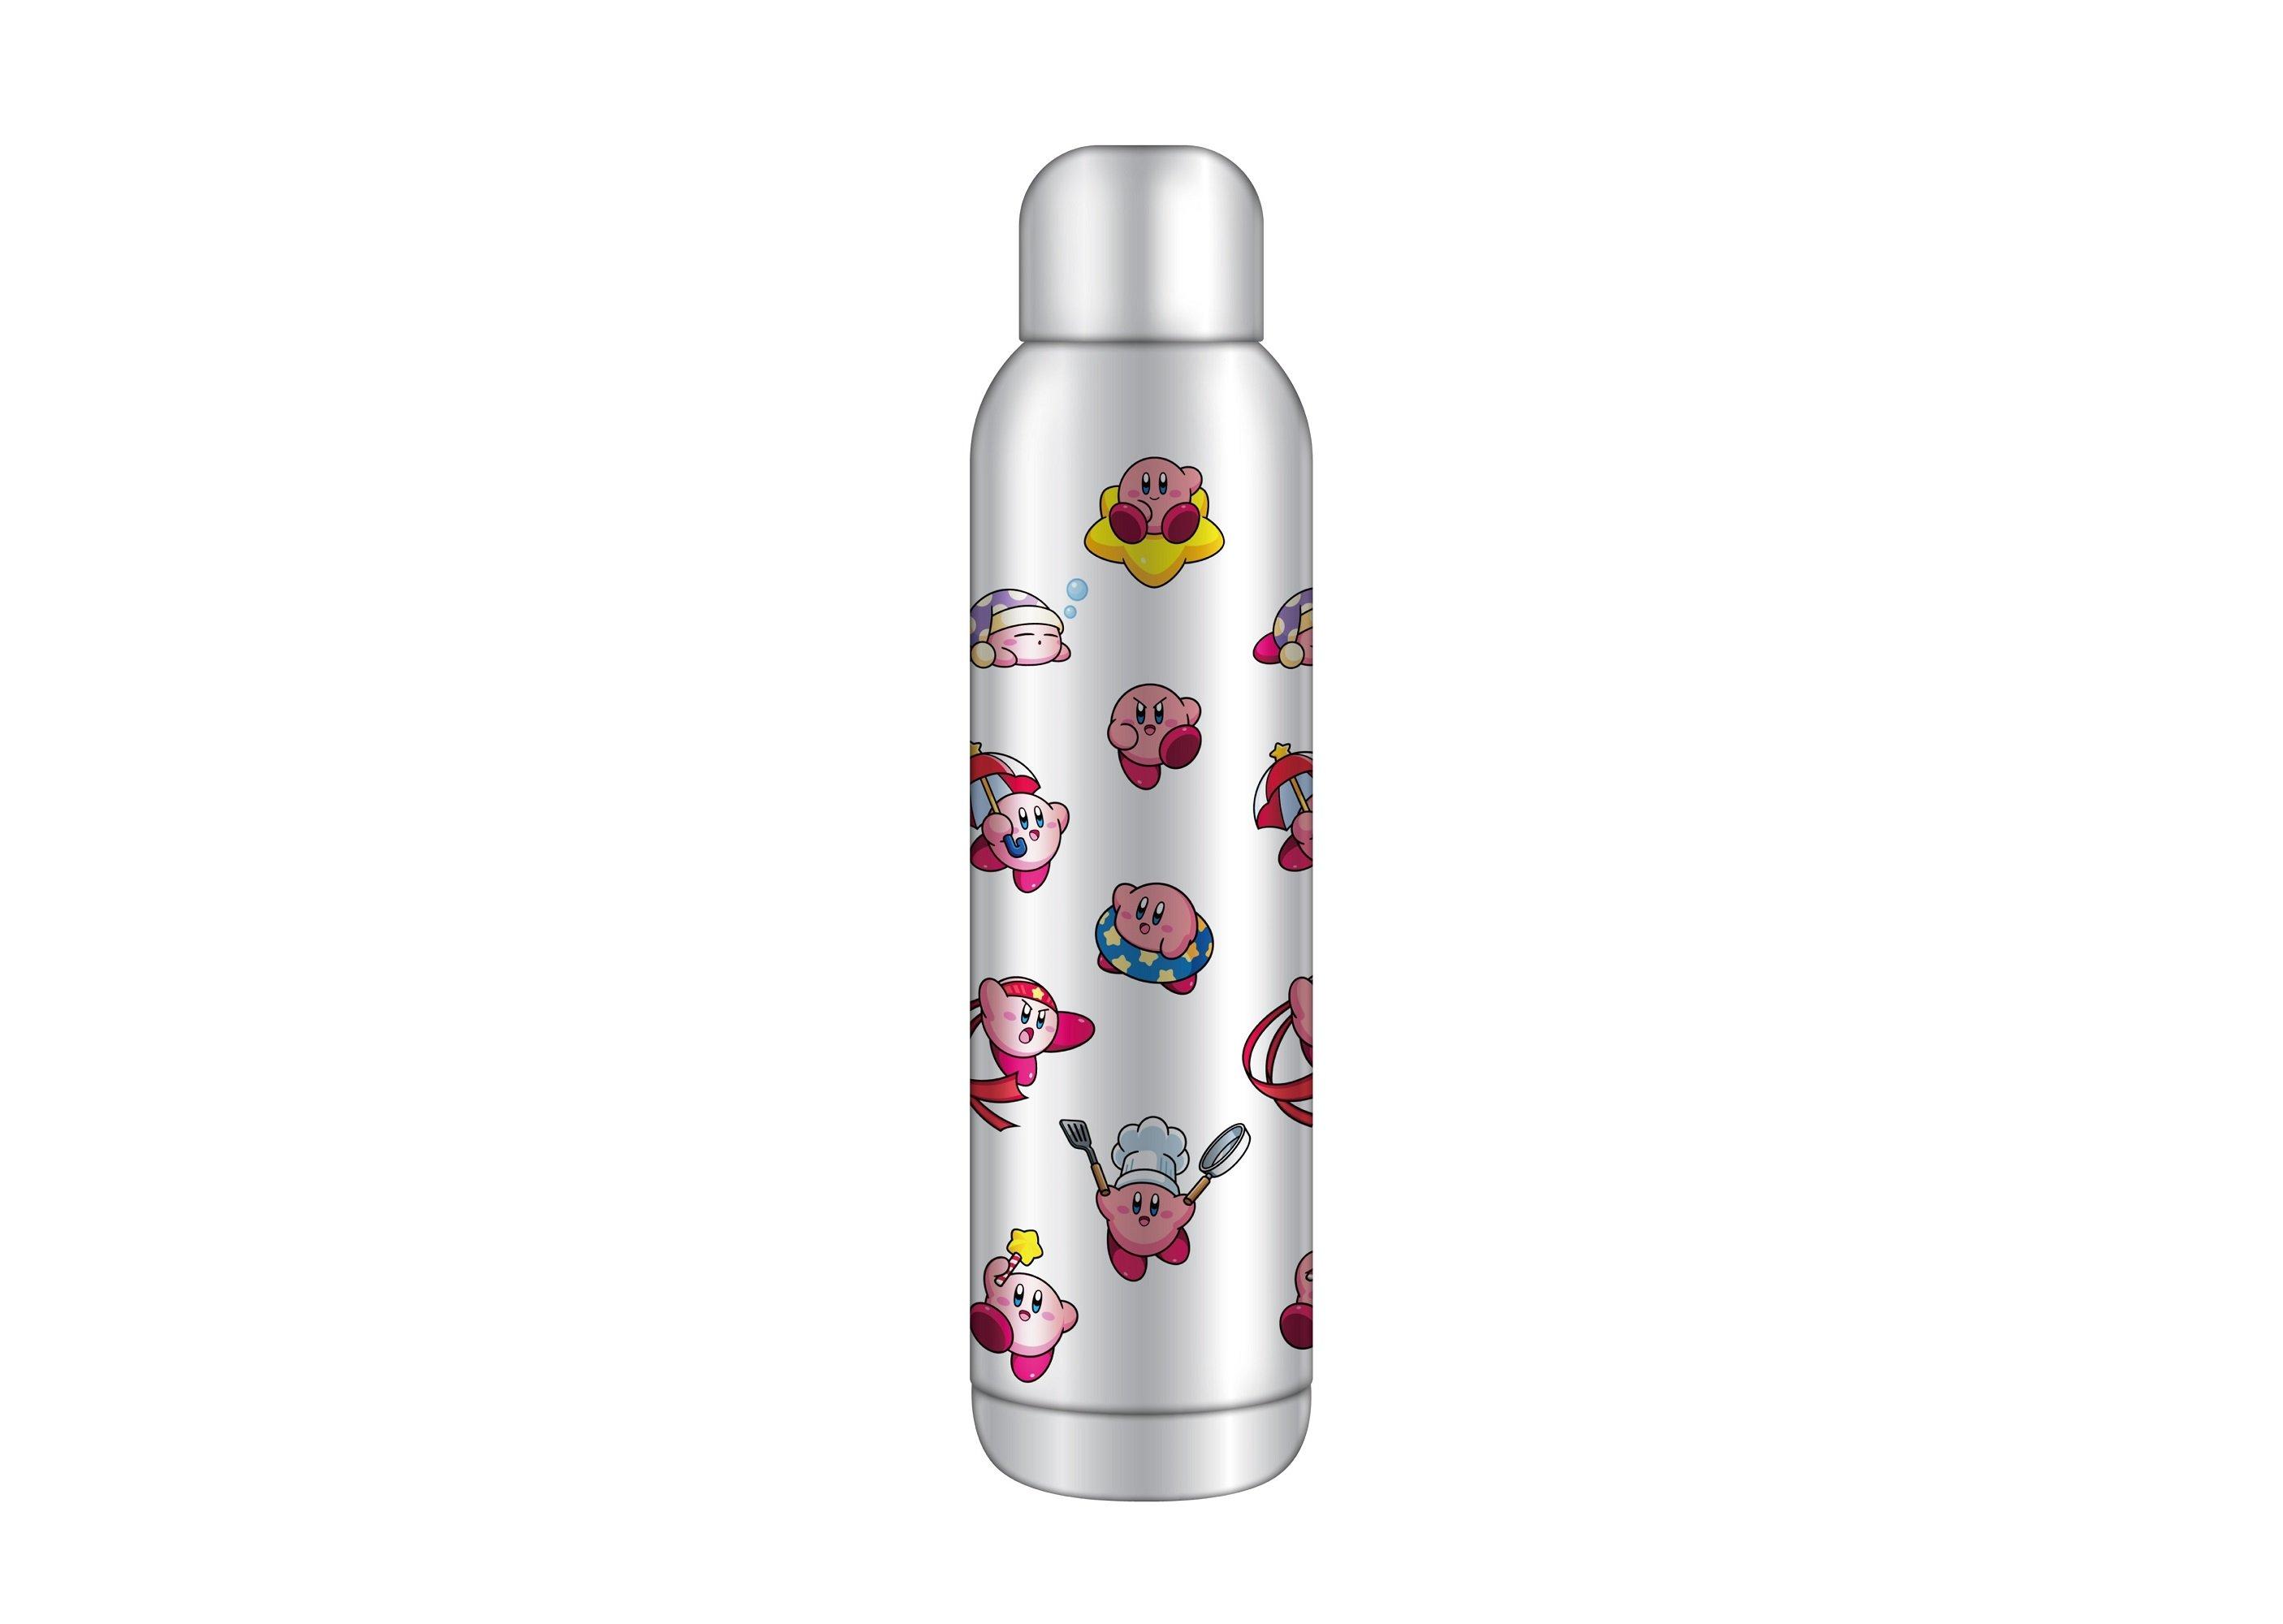 https://media.gamestop.com/i/gamestop/20008121_ALT01/Kirby-Classic-Video-Game-All-Over-Print-22-oz-Stainless-Steel-Water-Bottle?$pdp$